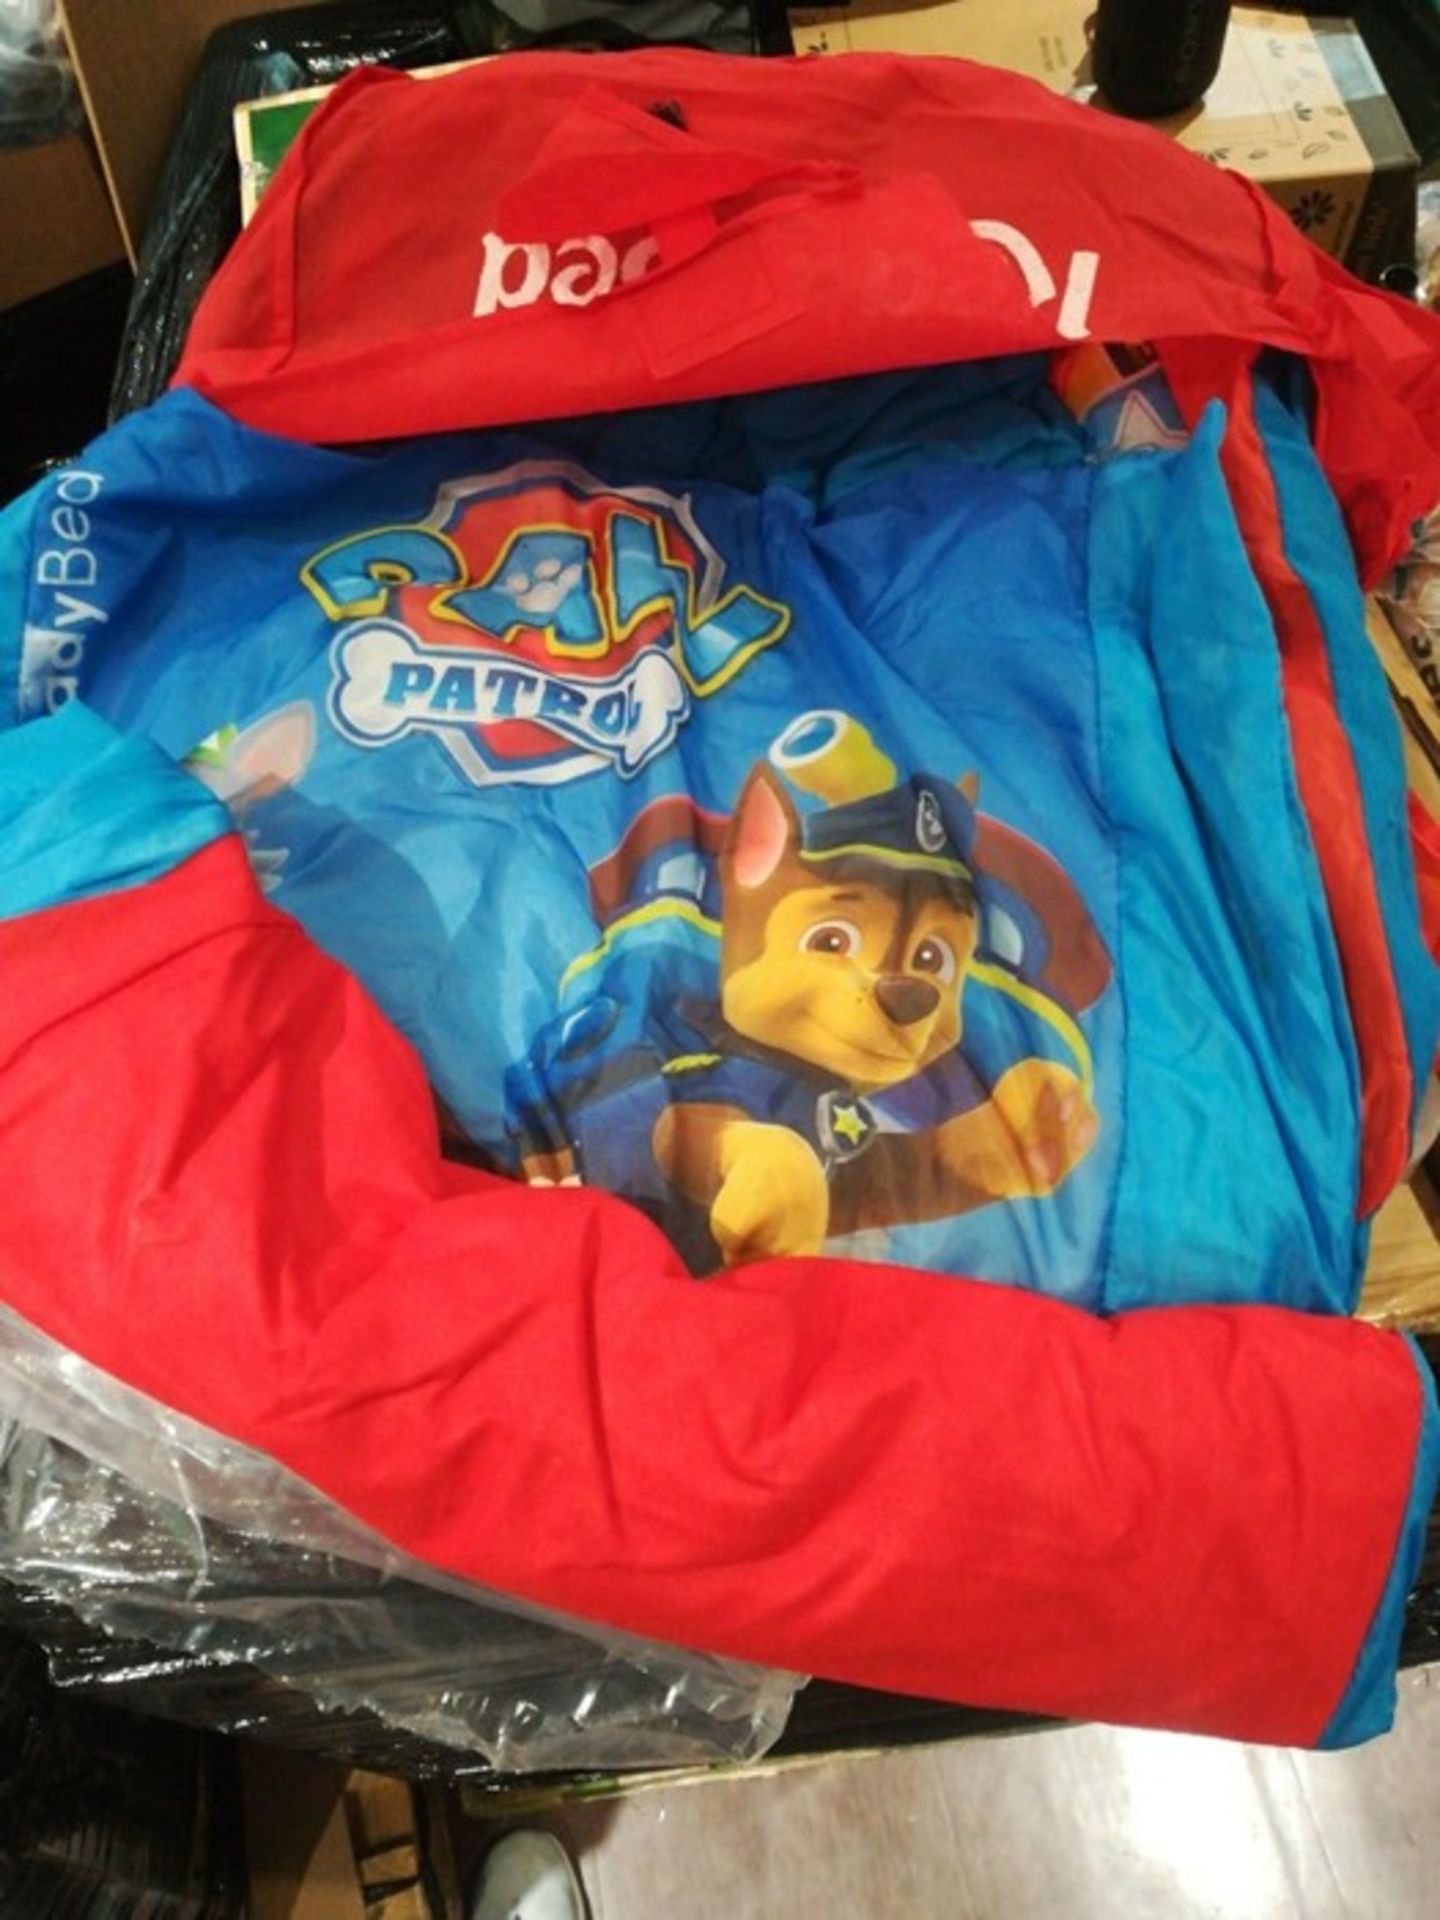 Readybed Paw Patrol Airbed and Sleeping Bag in One, Fabric, Blue, 130x61x23 cm - Image 2 of 2